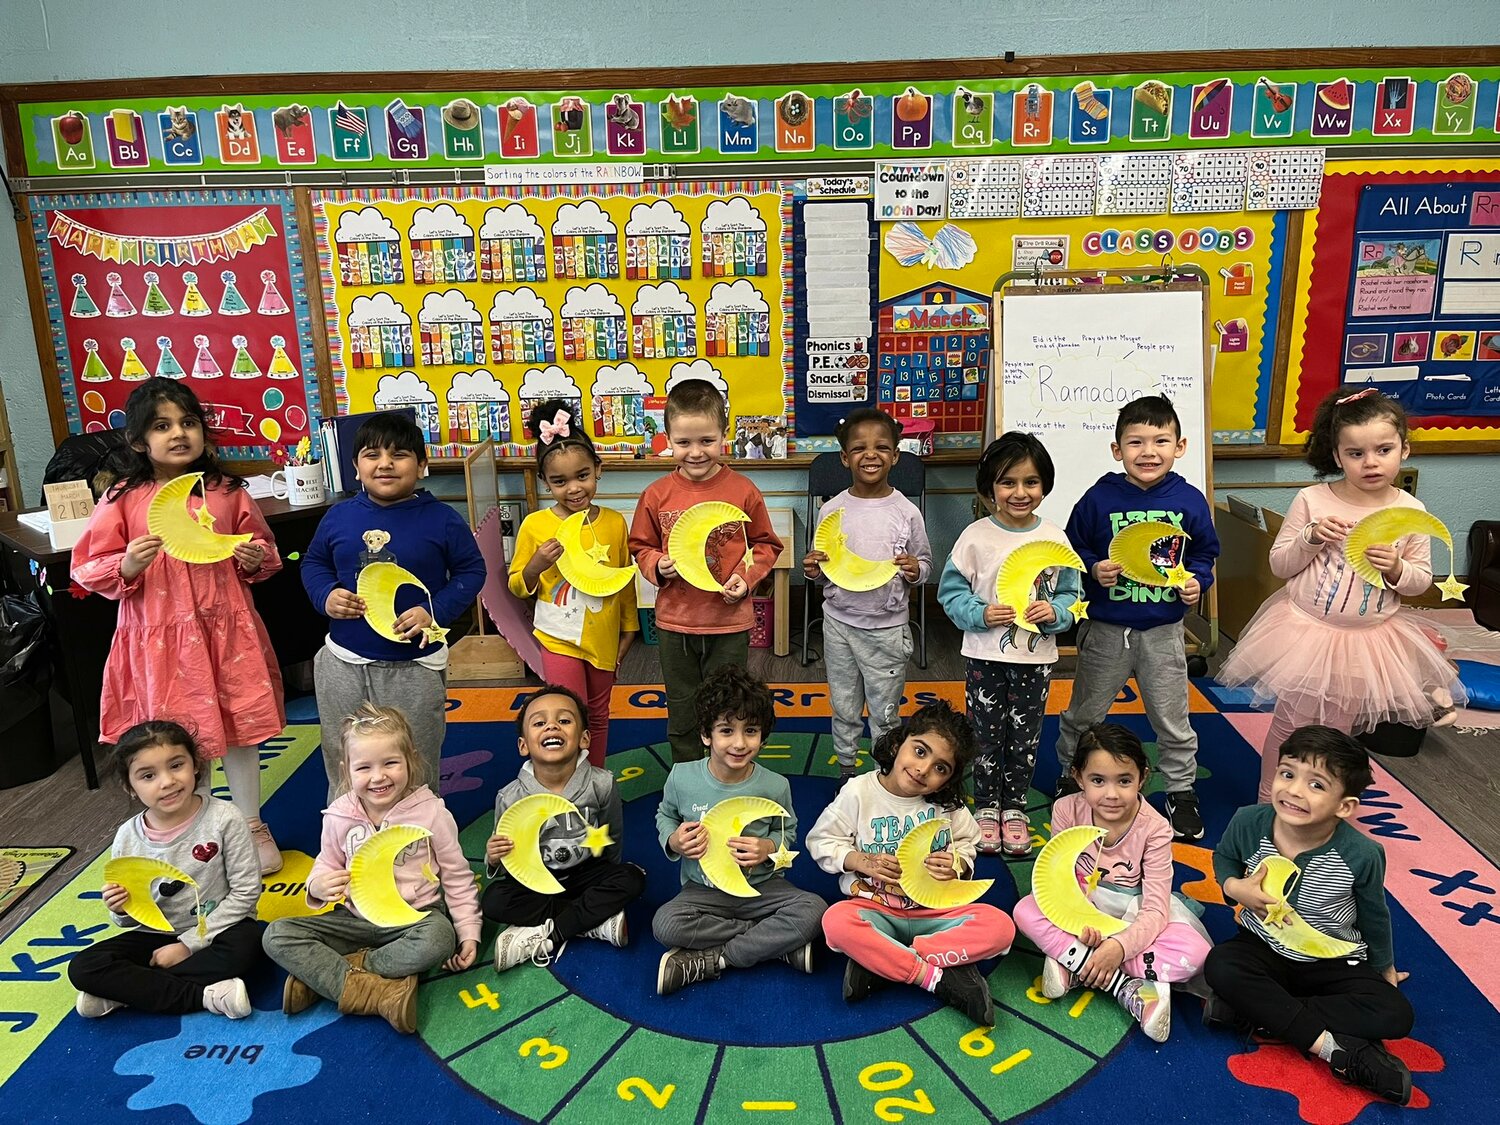 Howell Road Elementary School students with their crescent moon and stars in honor of Ramadan.